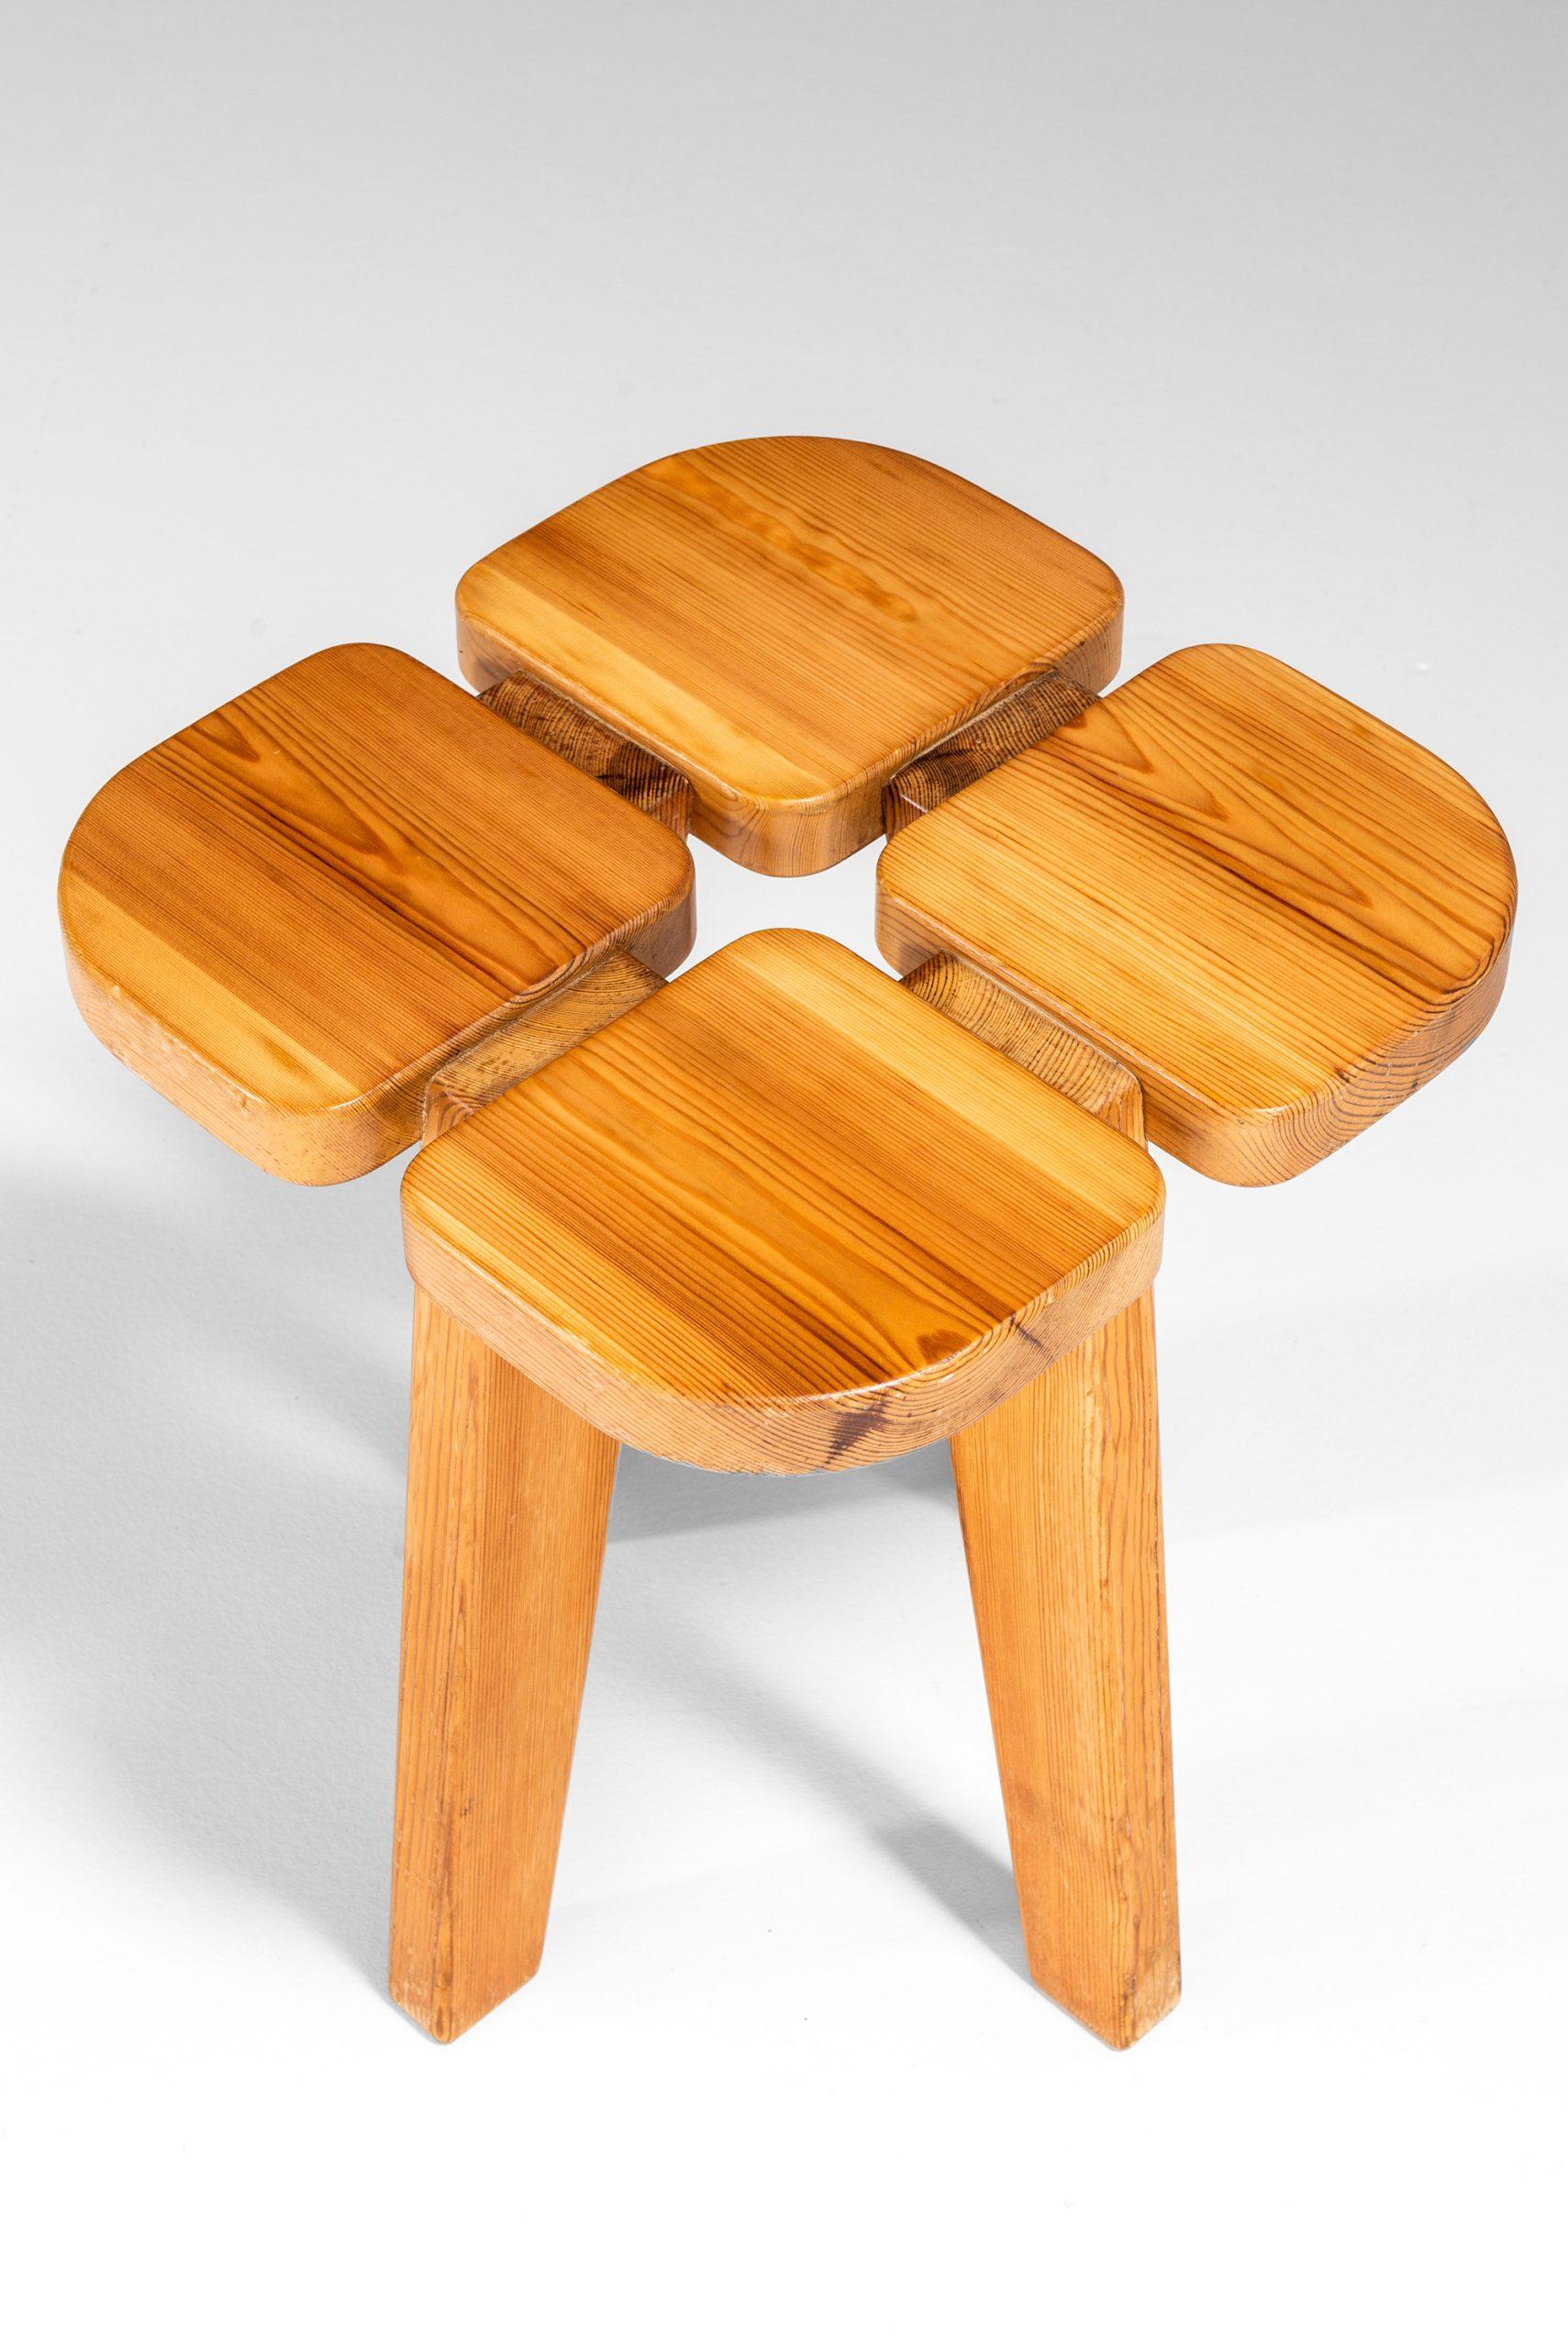 Late 20th Century Lisa Johansson-Pape Stools Model Apila Produced by Stockmann Oy in Finland